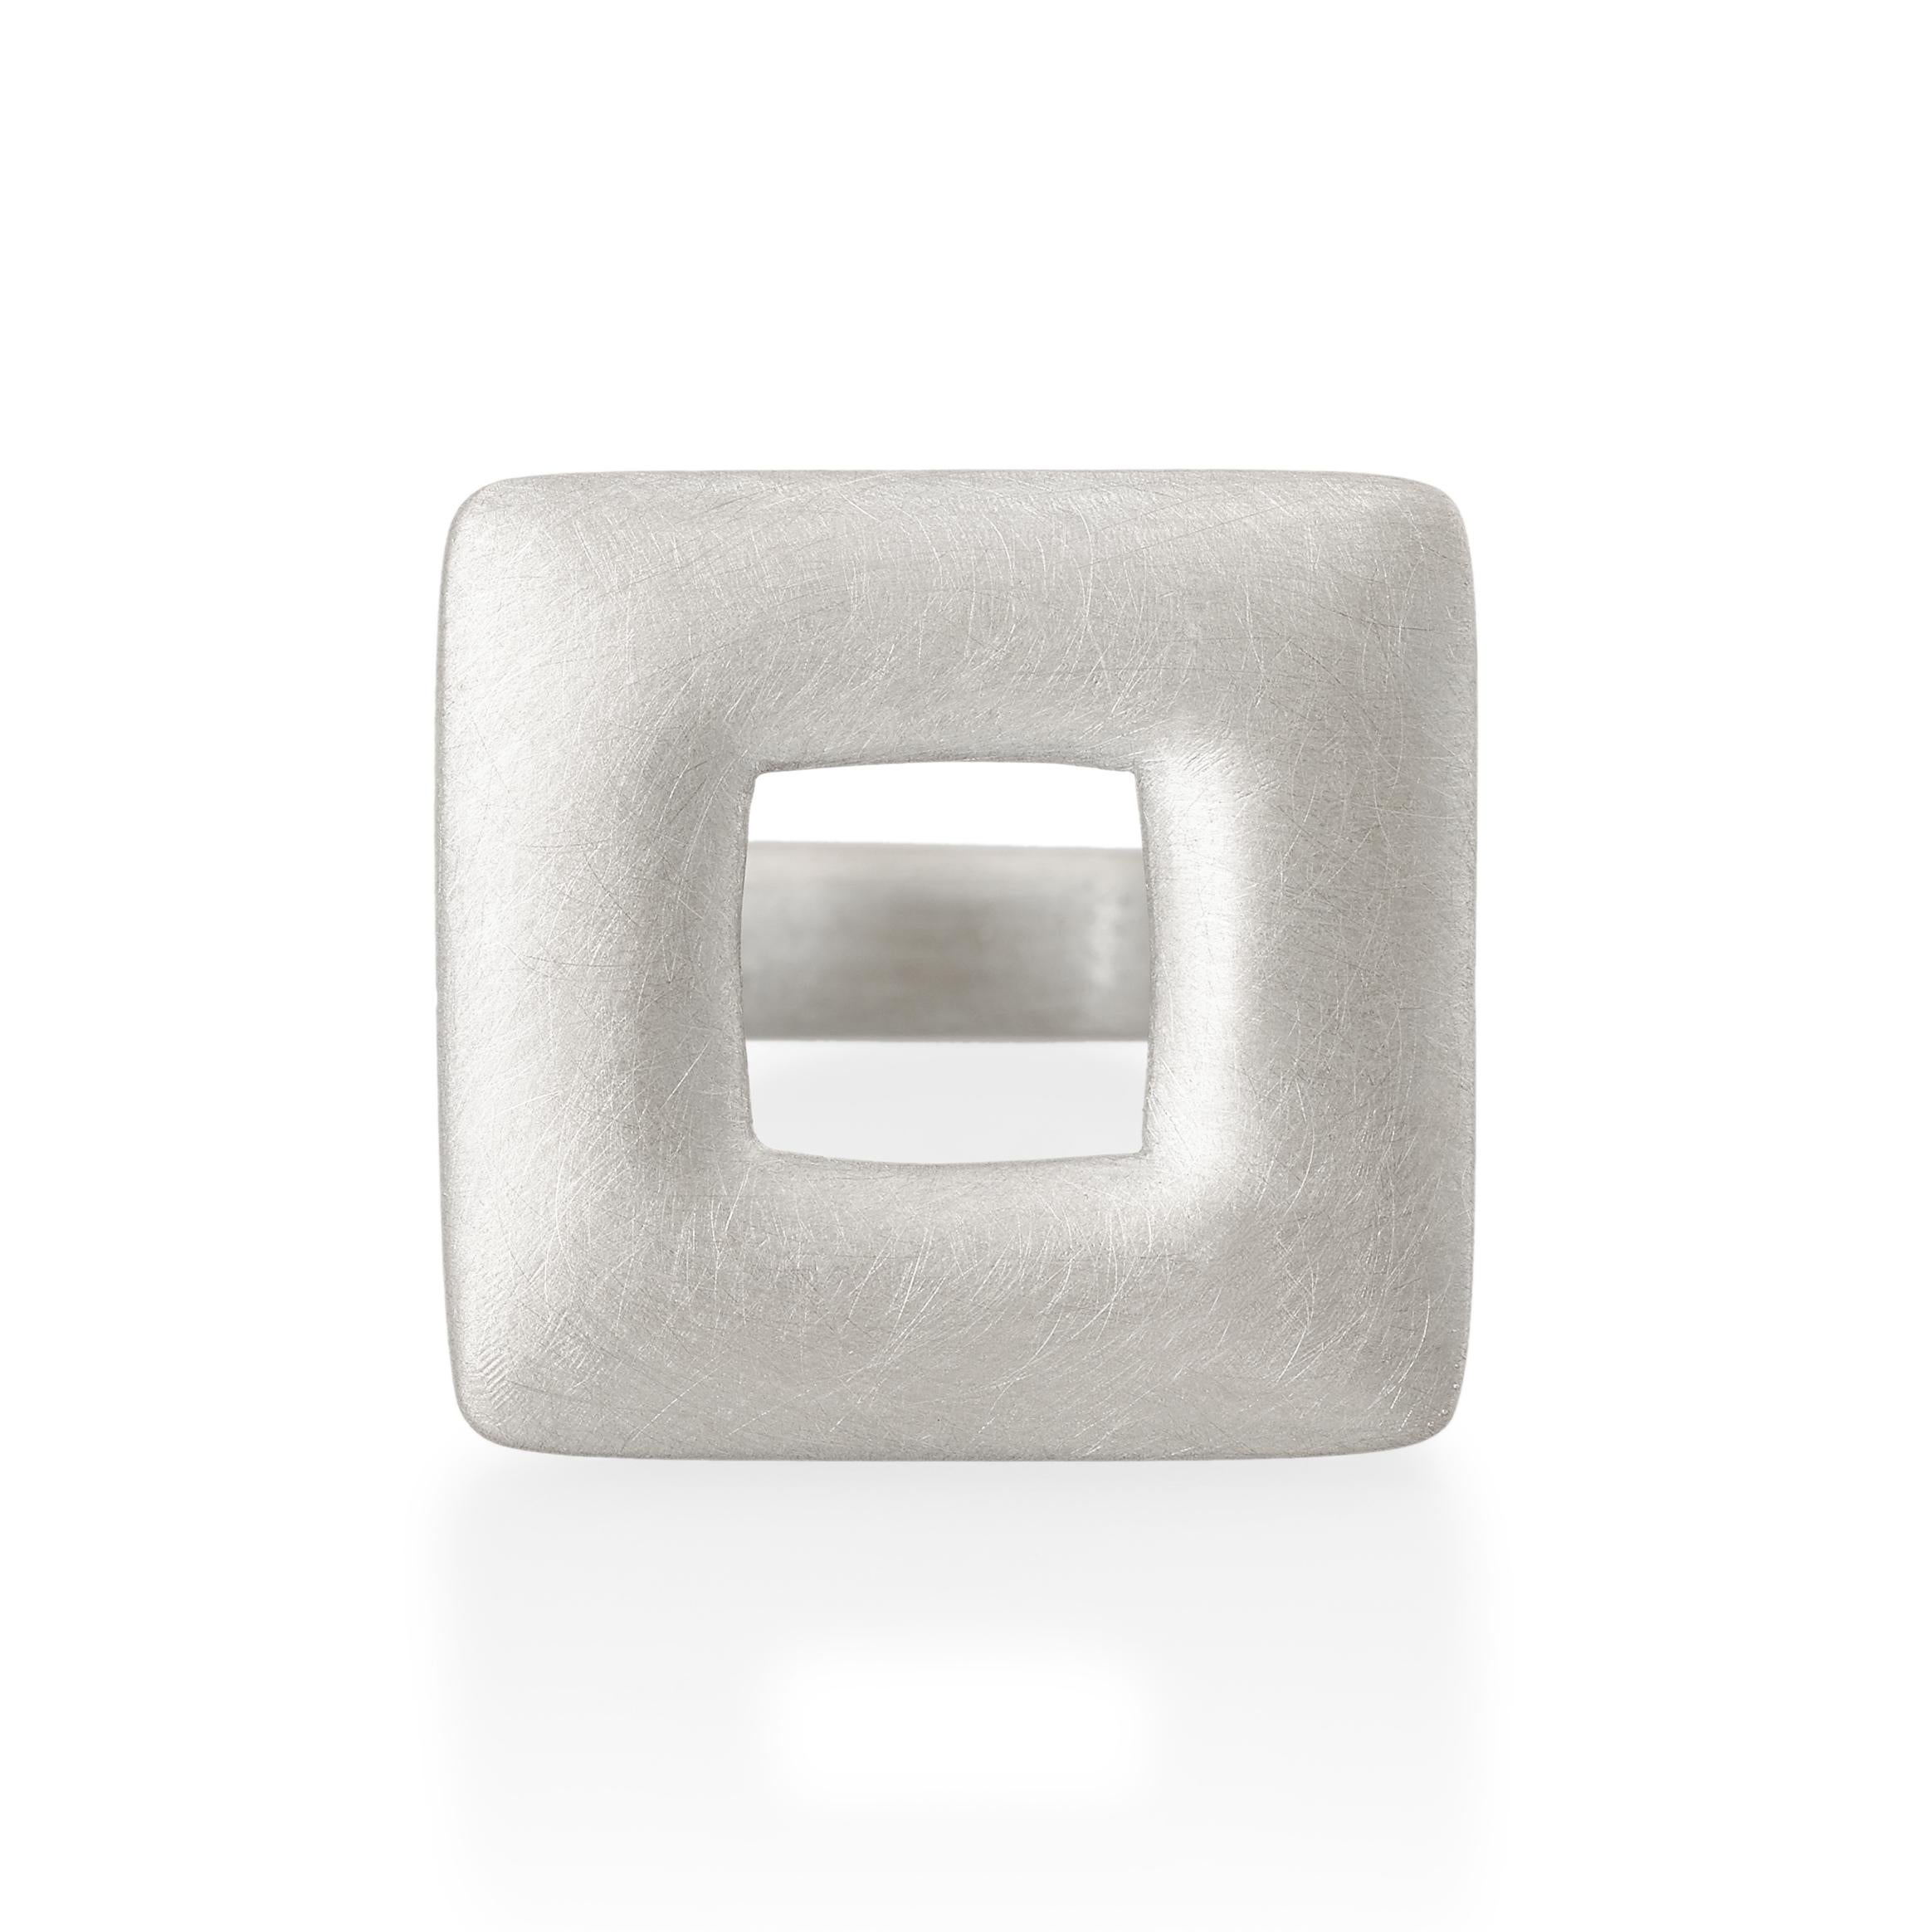 Hand carved large square ring with a square window in the centre.
Ref: S18001

24mm square  
Sterling silver

Cadby & Co are a family business that specialise in reusing & up cycling old cut diamonds and fine gem stones. Deborah Cadby’s designs and